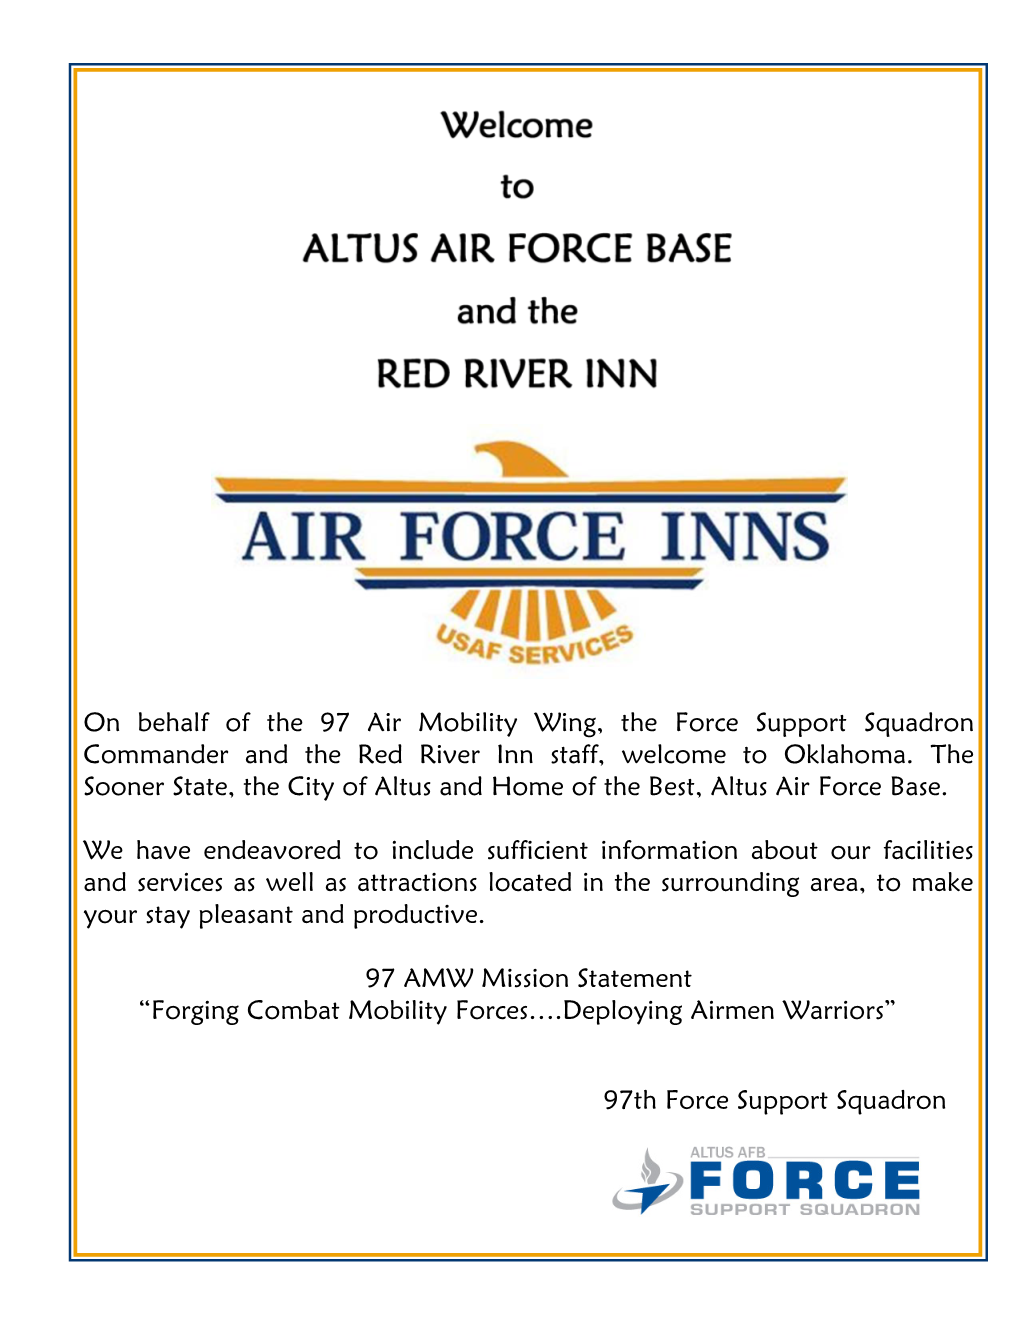 On Behalf of the 97 Air Mobility Wing, the Force Support Squadron